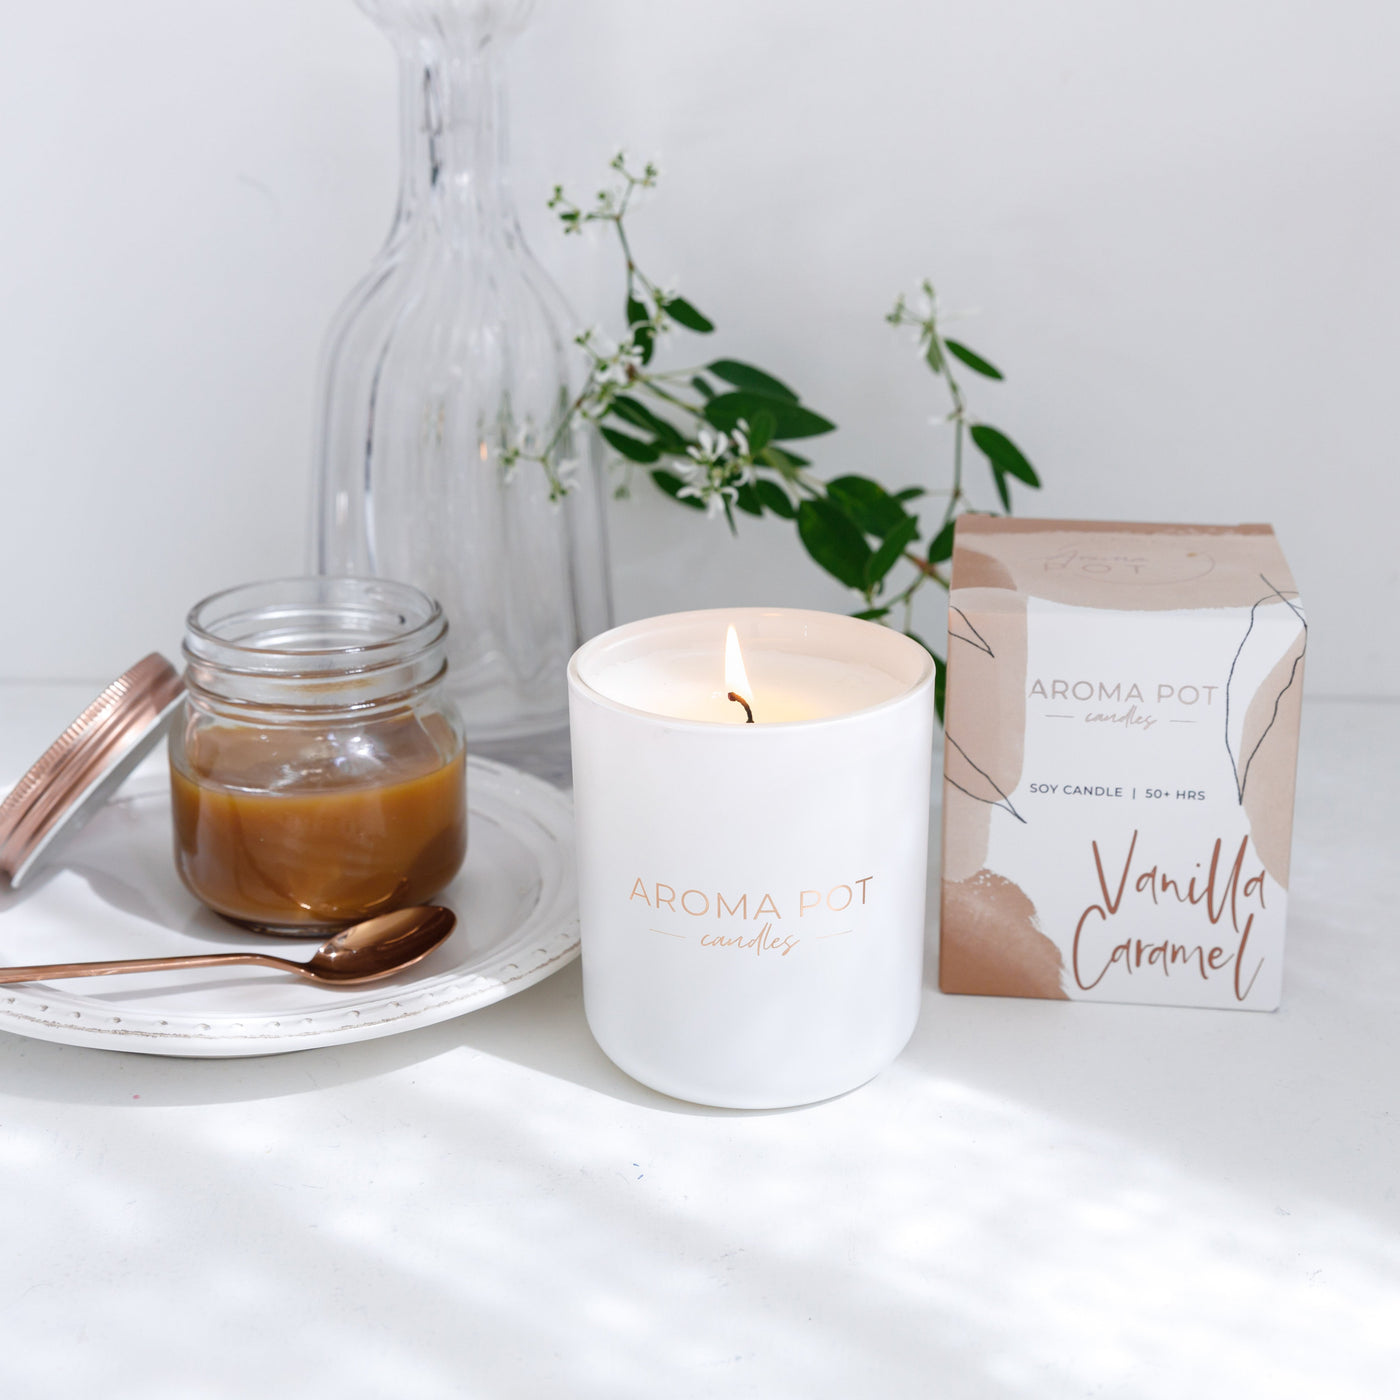 classic scented soy candle | vanilla caramel | 50+hrs